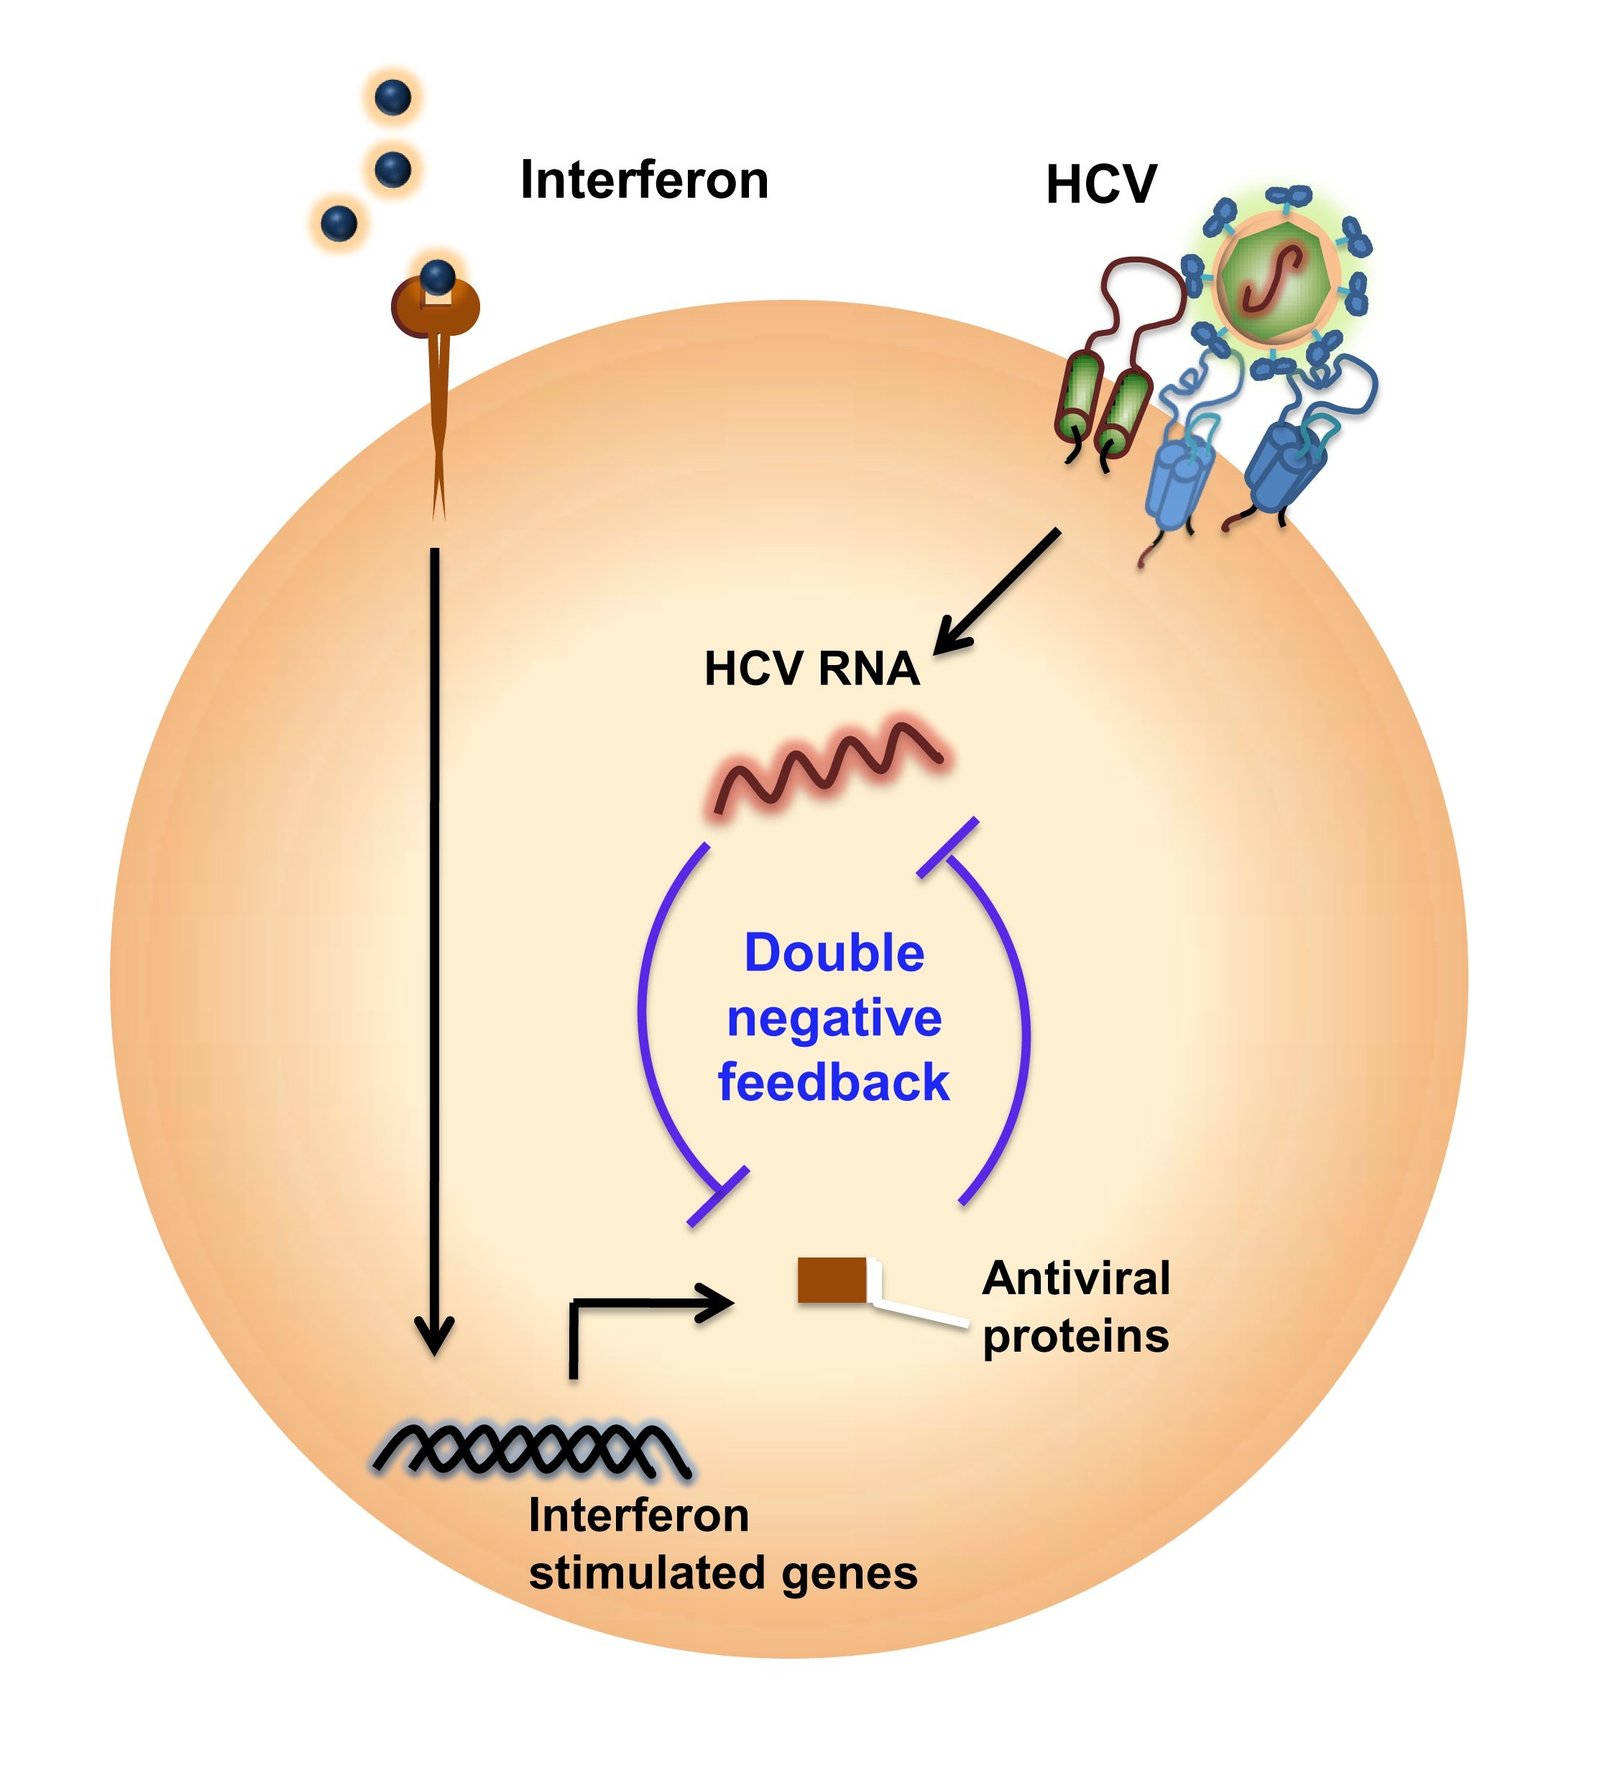 Schematic&#x20;representation&#x20;of&#x20;the&#x20;interferon-signaling&#x20;network&#x20;and&#x20;its&#x20;interaction&#x20;with&#x20;HCV